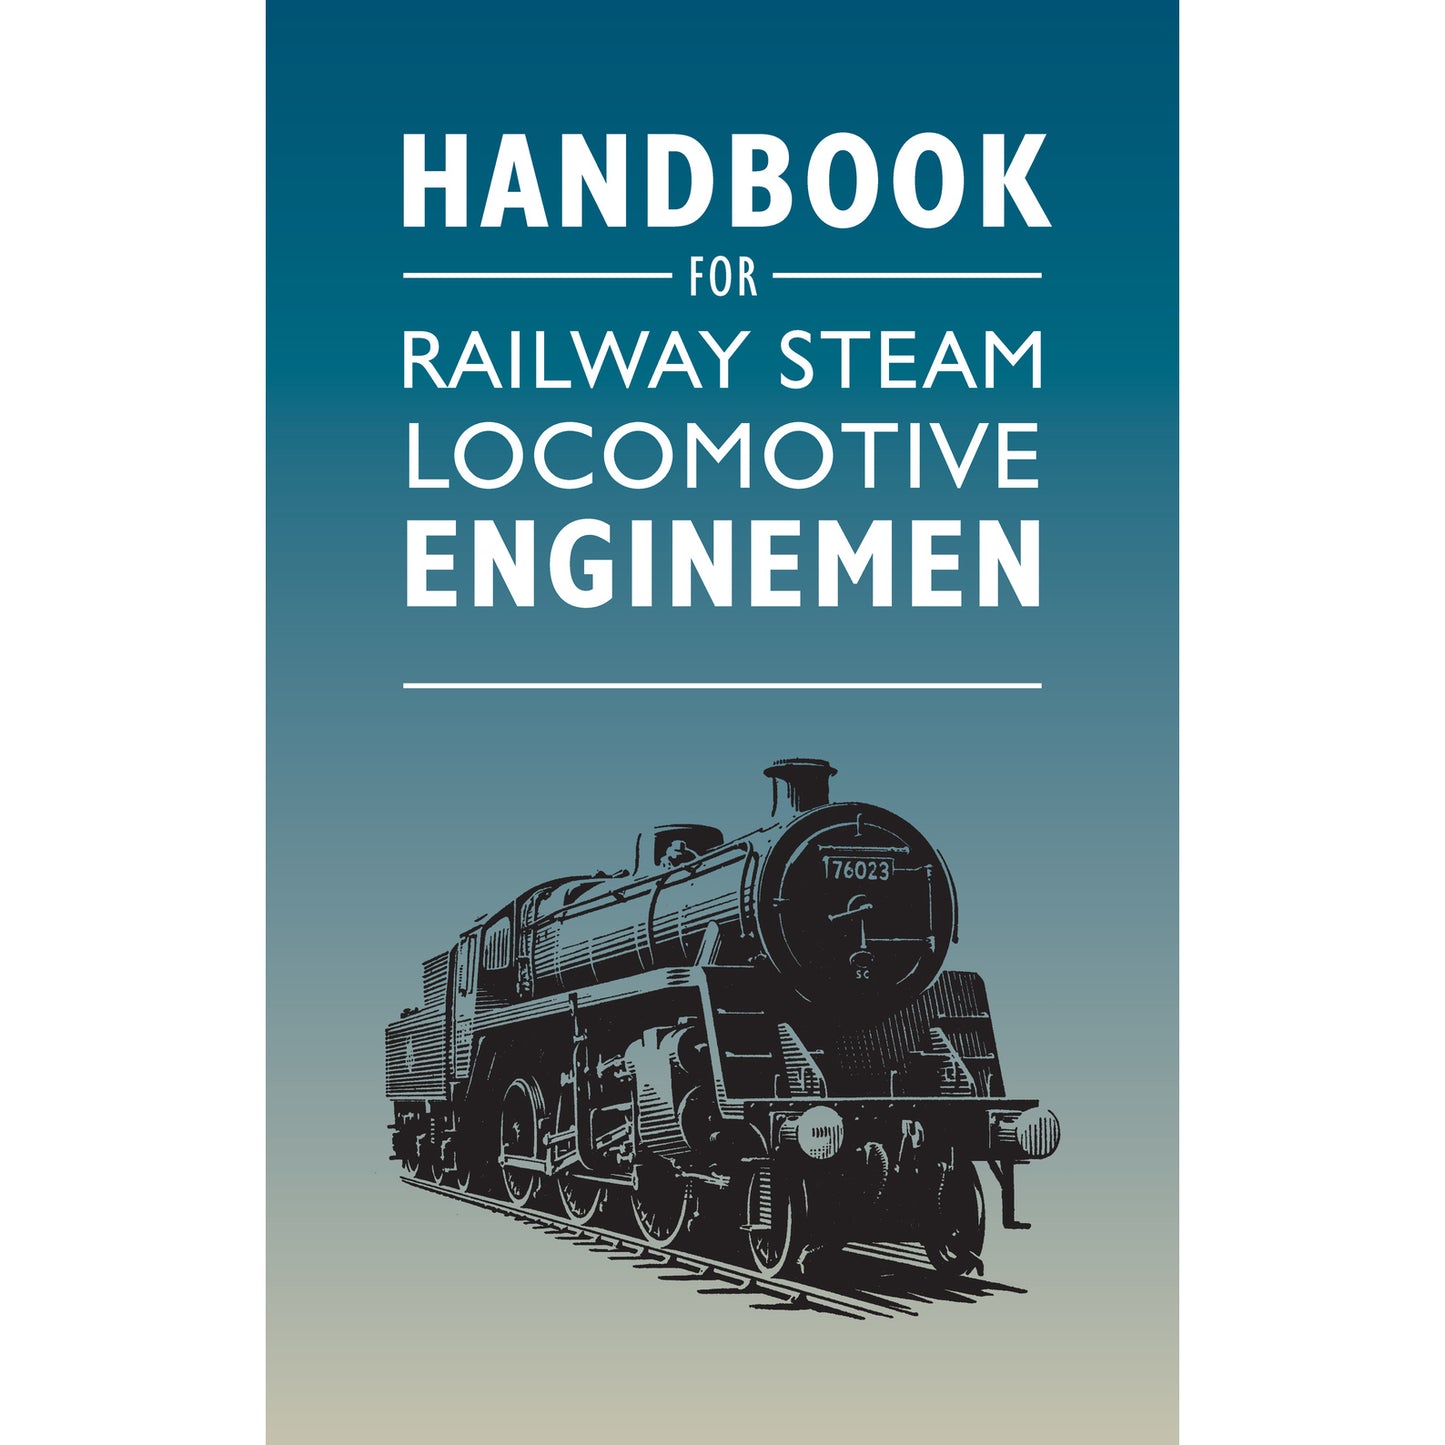 A blue book cover with the title in white type and an woodcut style image of locomotive number 76023 in black .